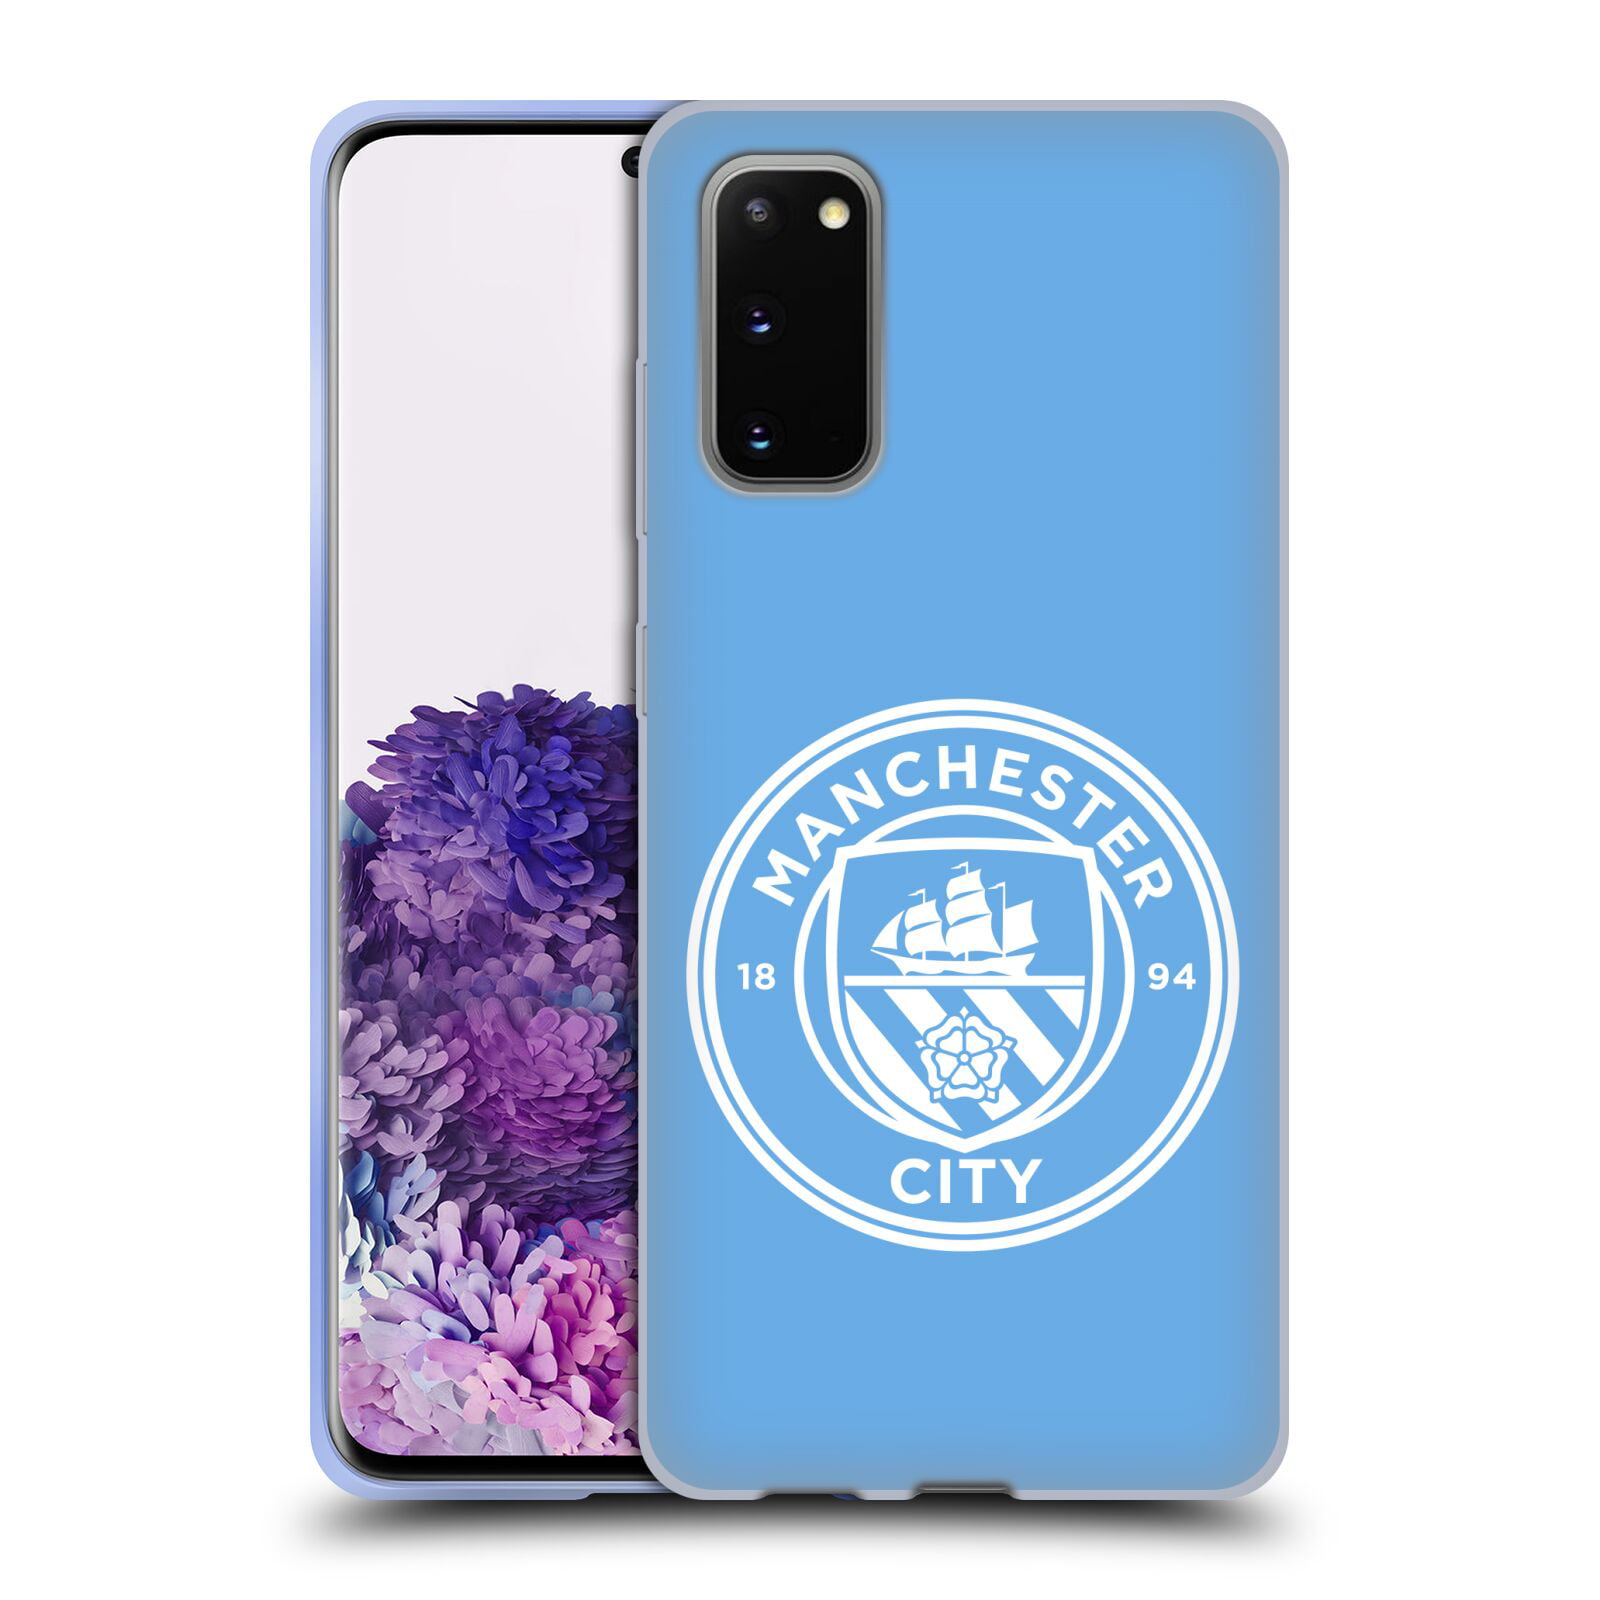 Official Manchester City Man City FC Home 2020/21 Badge Kit Leather Book Wallet Case Cover Compatible For Samsung Galaxy A20e 2019